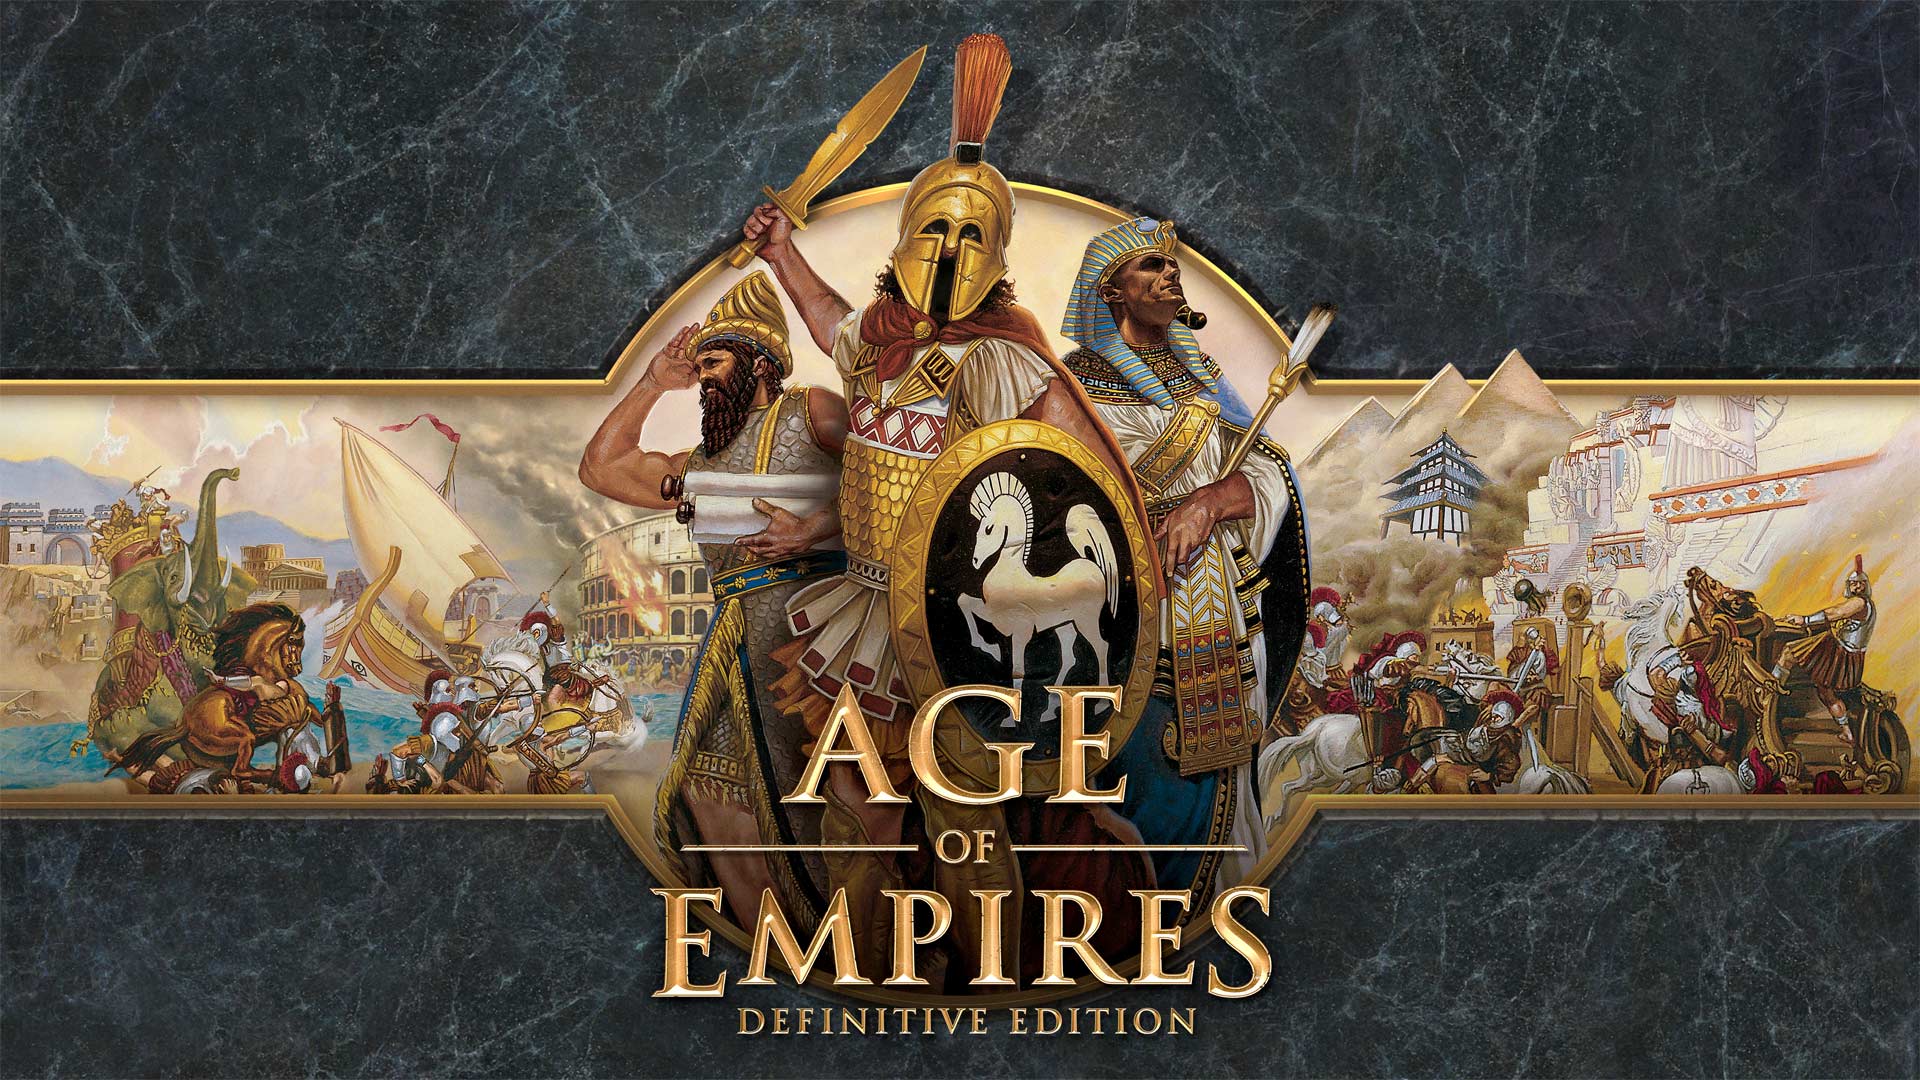 Age of Empires: Definitive Edition Wallpaper